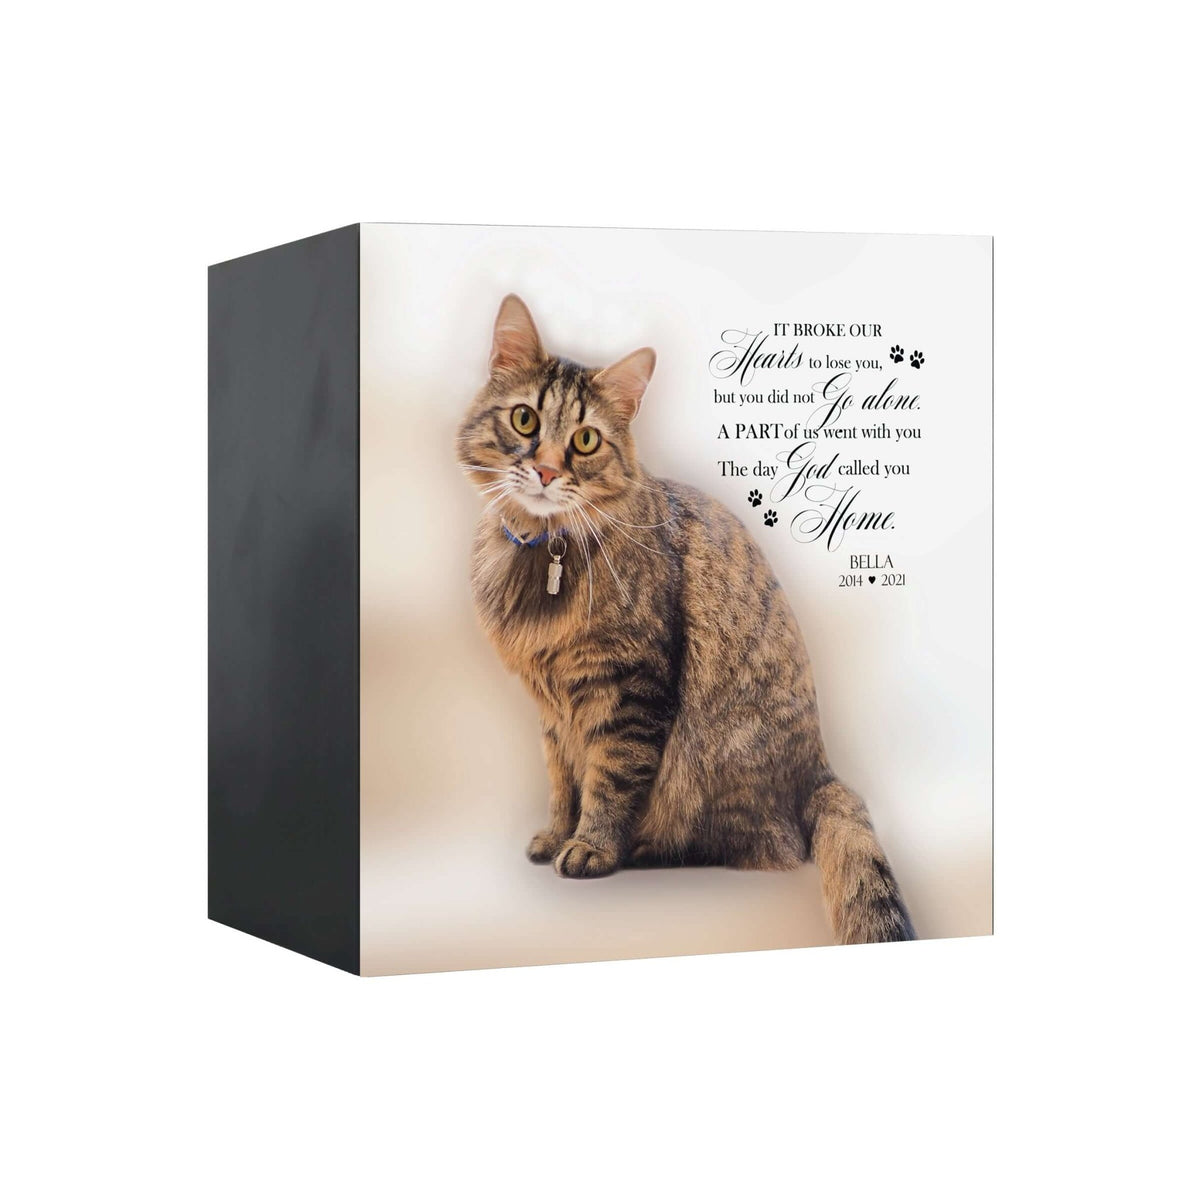 Pet Memorial Custom Photo Shadow Box Cremation Urn - It Broke Our Hearts To Lose You - LifeSong Milestones